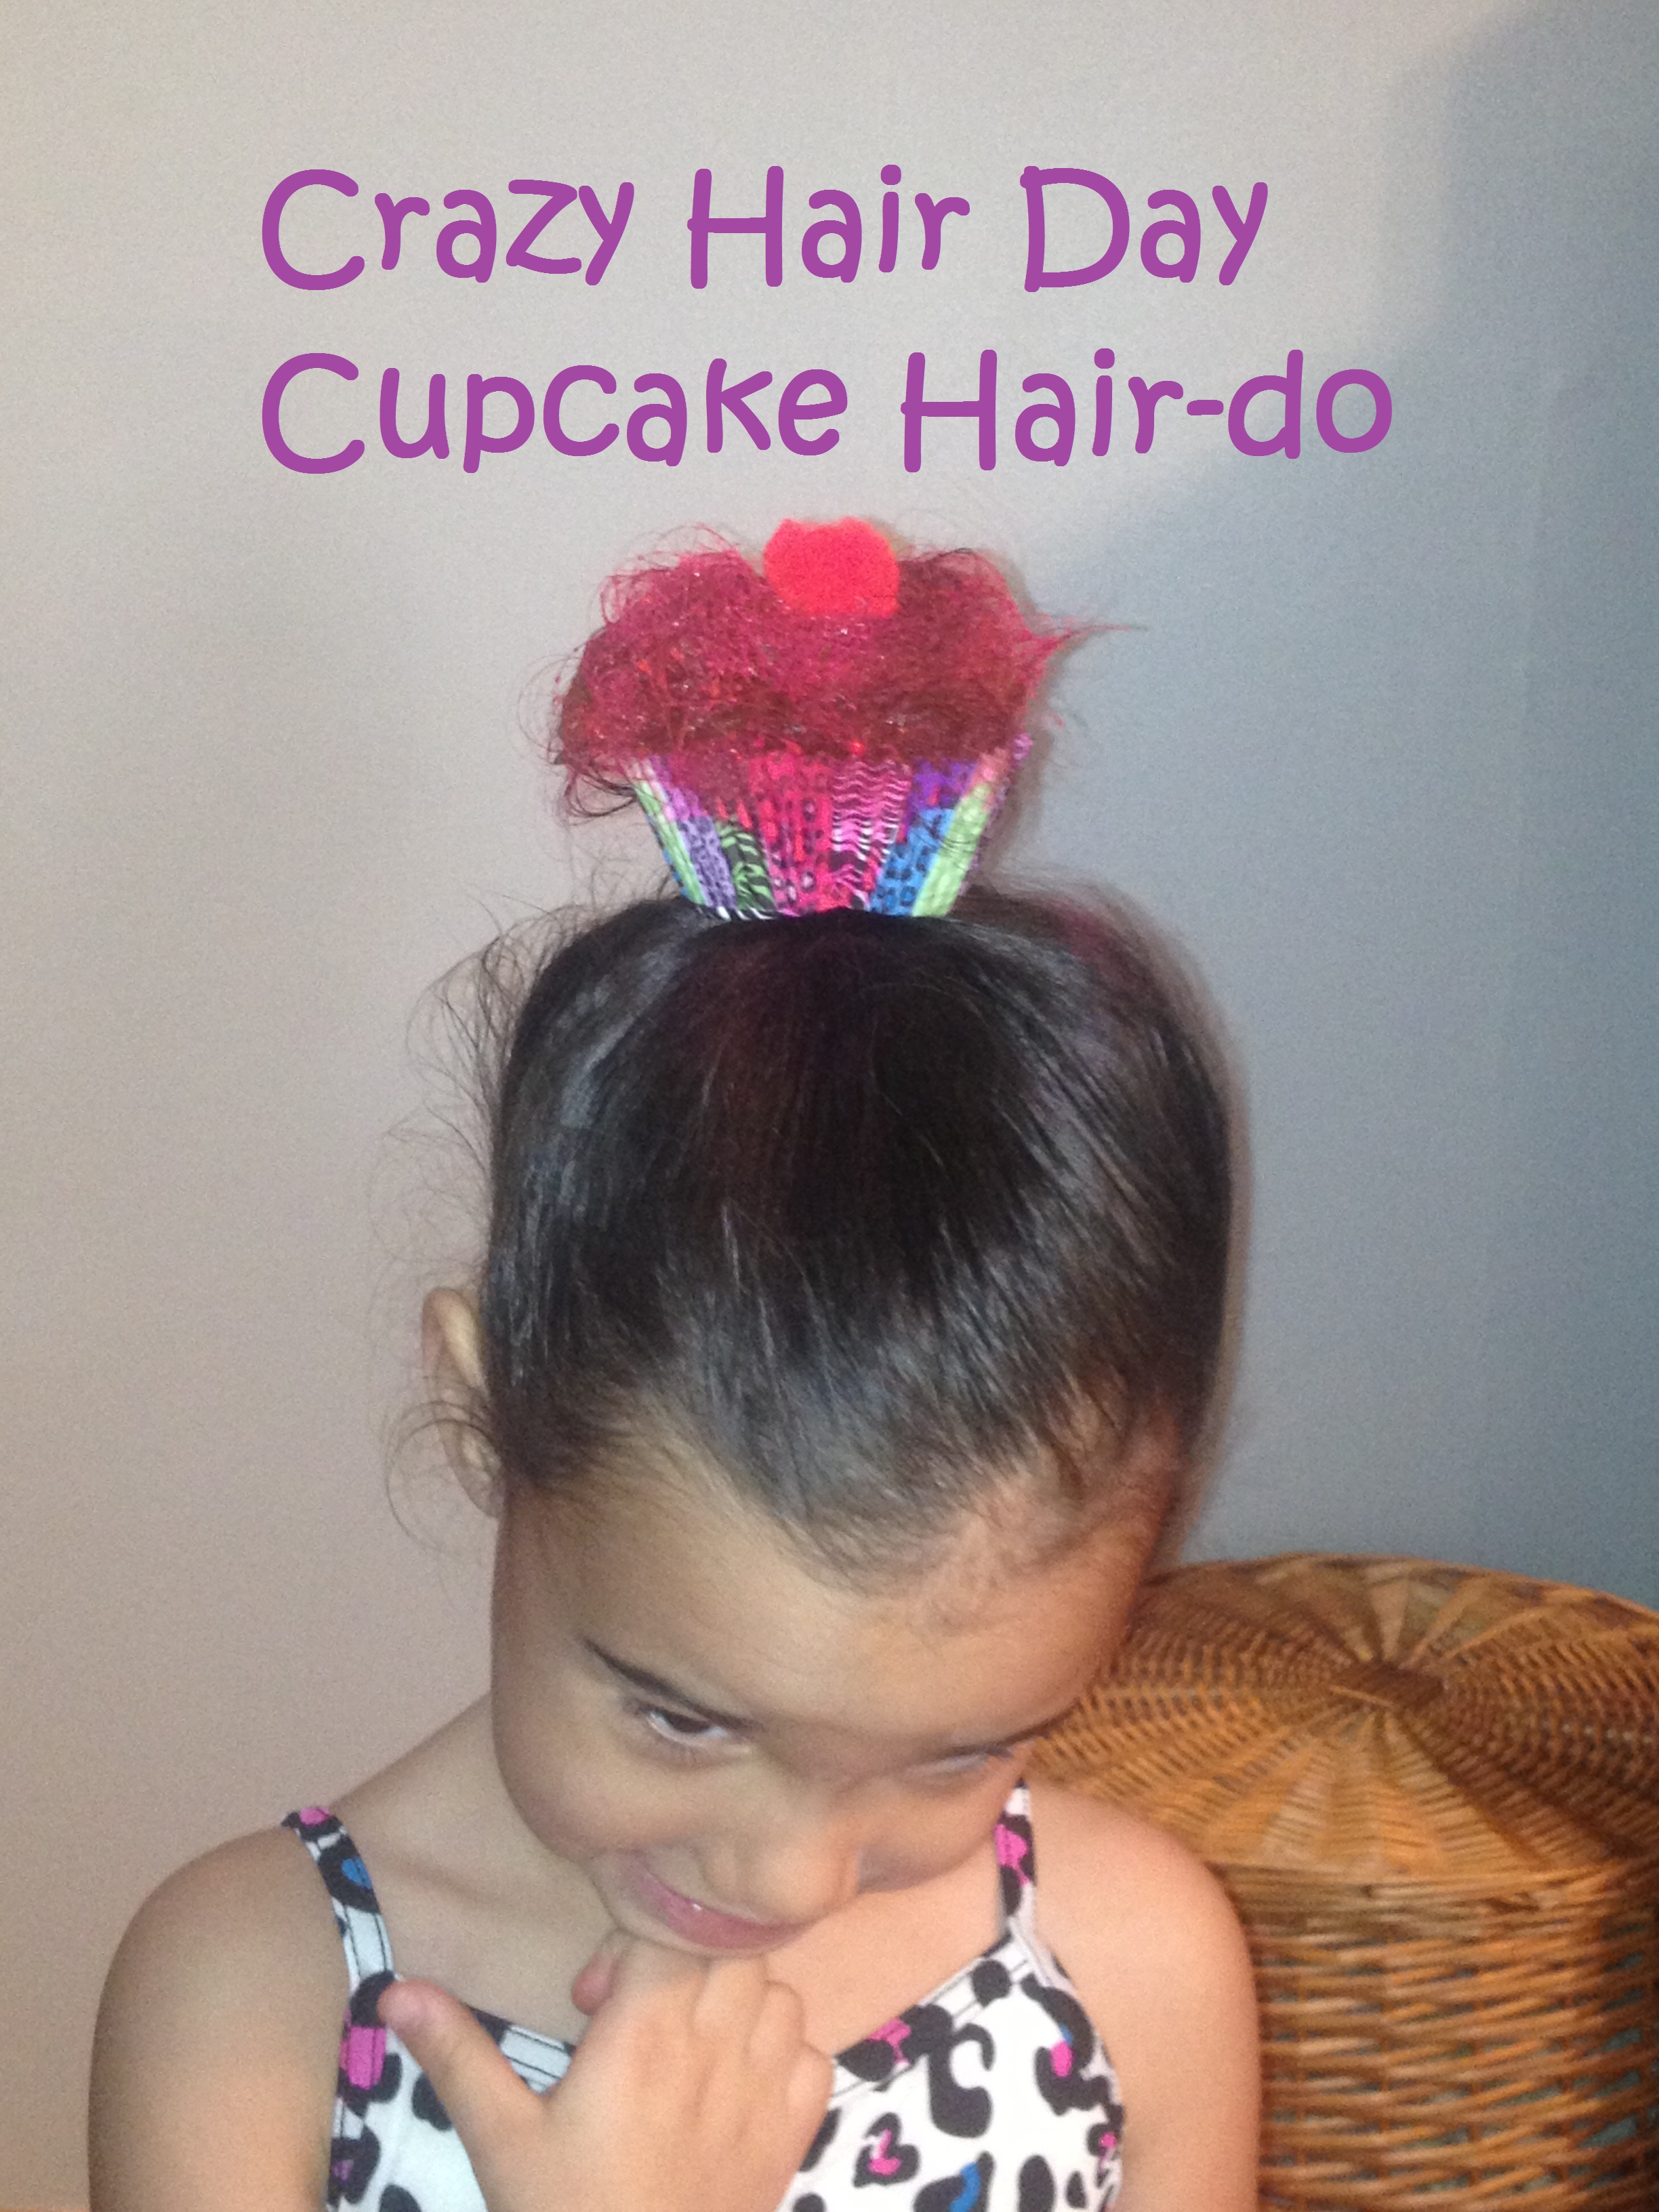 How to Do Crazy Hair Day Cupcake